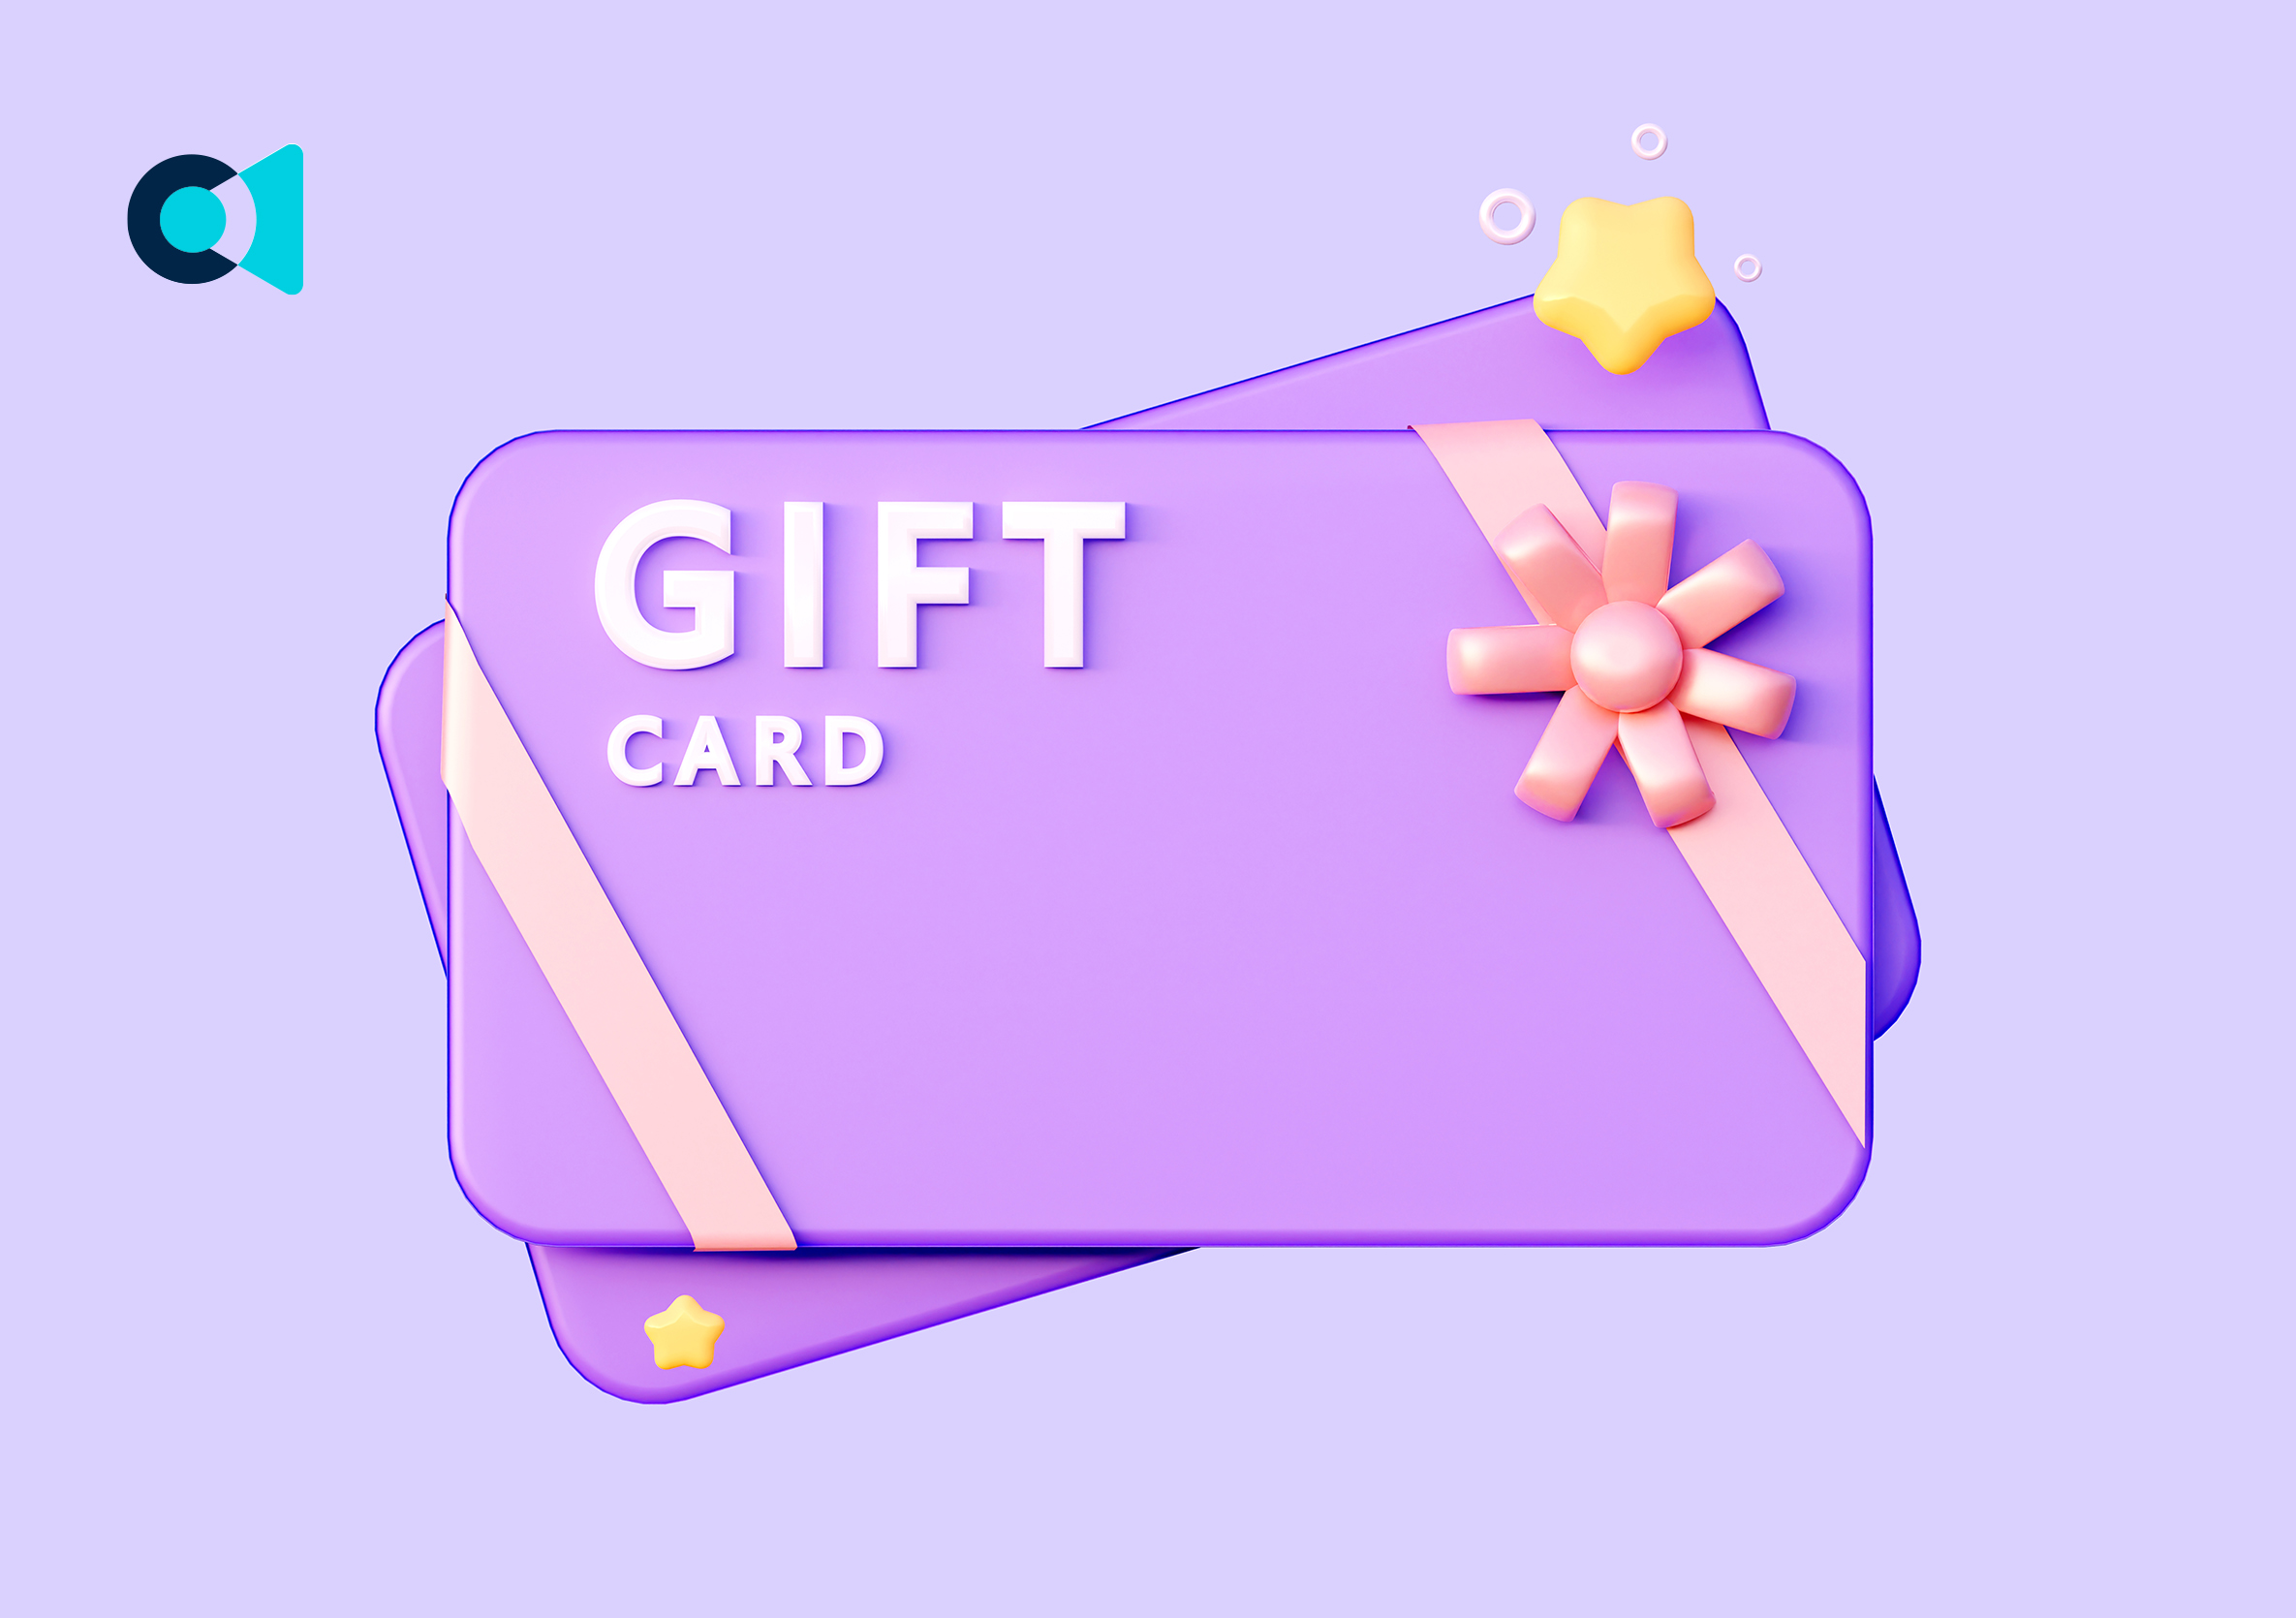 eBay Gift Cards for Online Shopping: Perfect gift